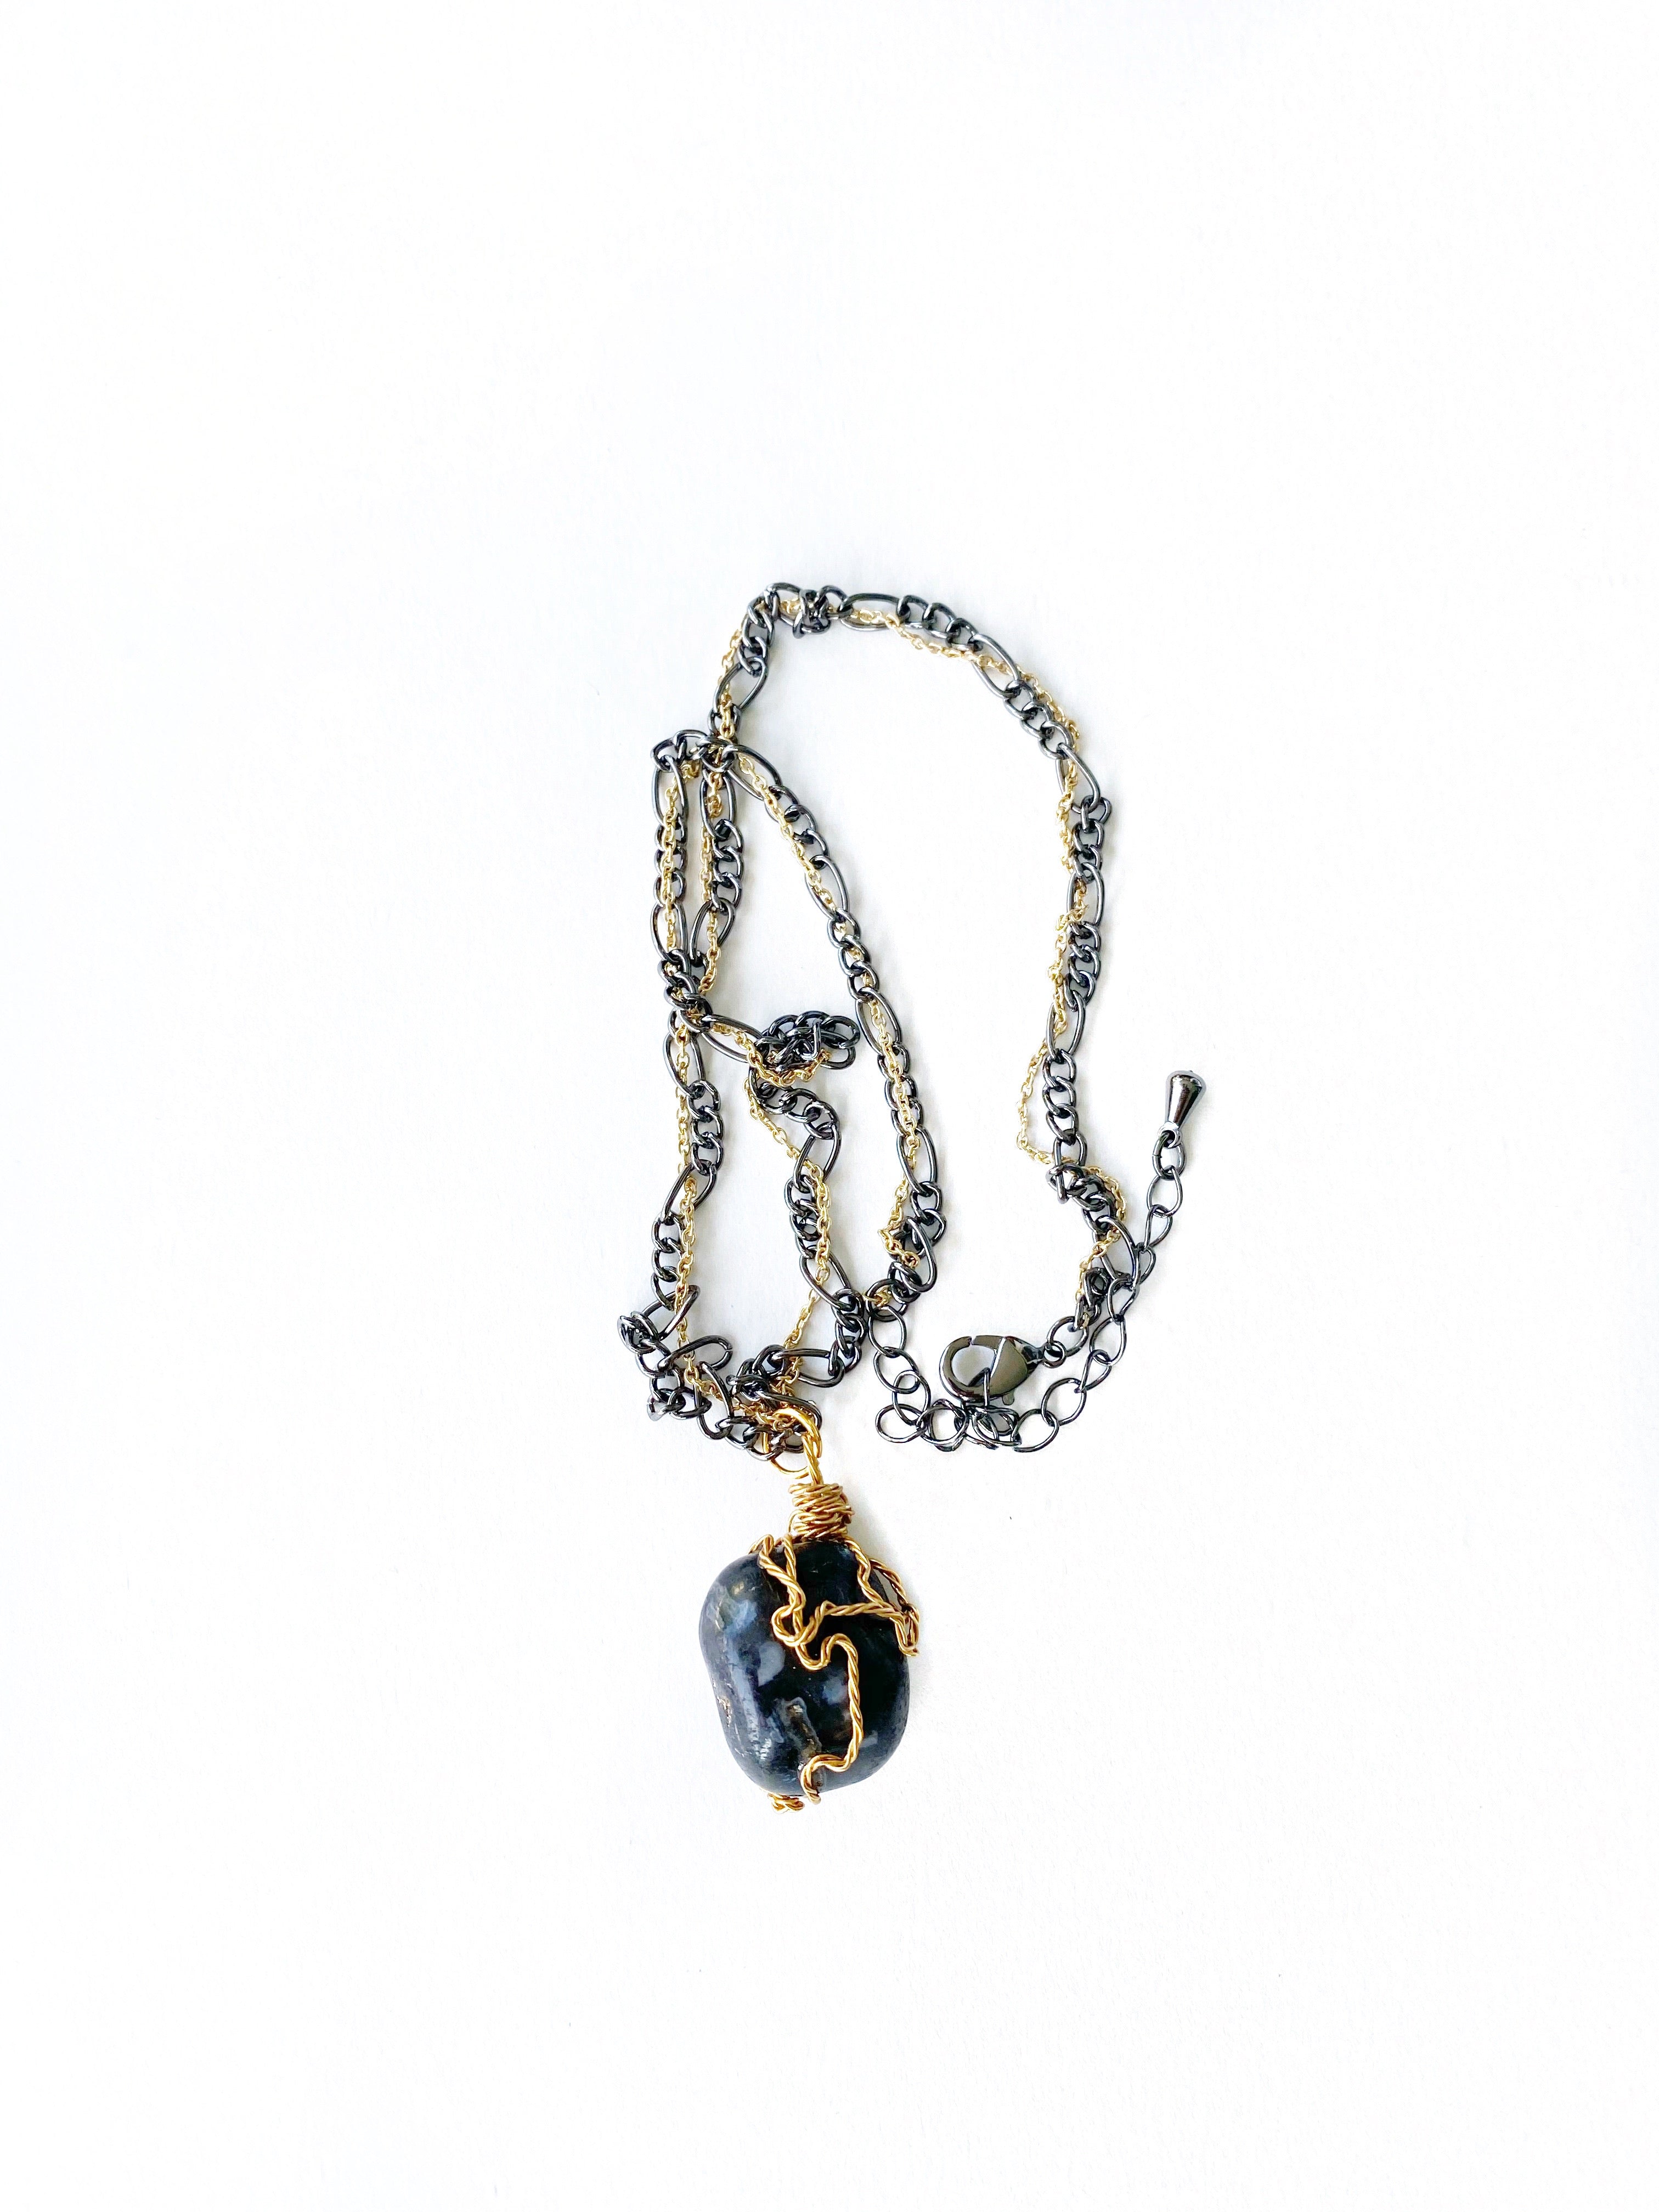 Snowflake Obsidian Crystal Black & Gold Necklace